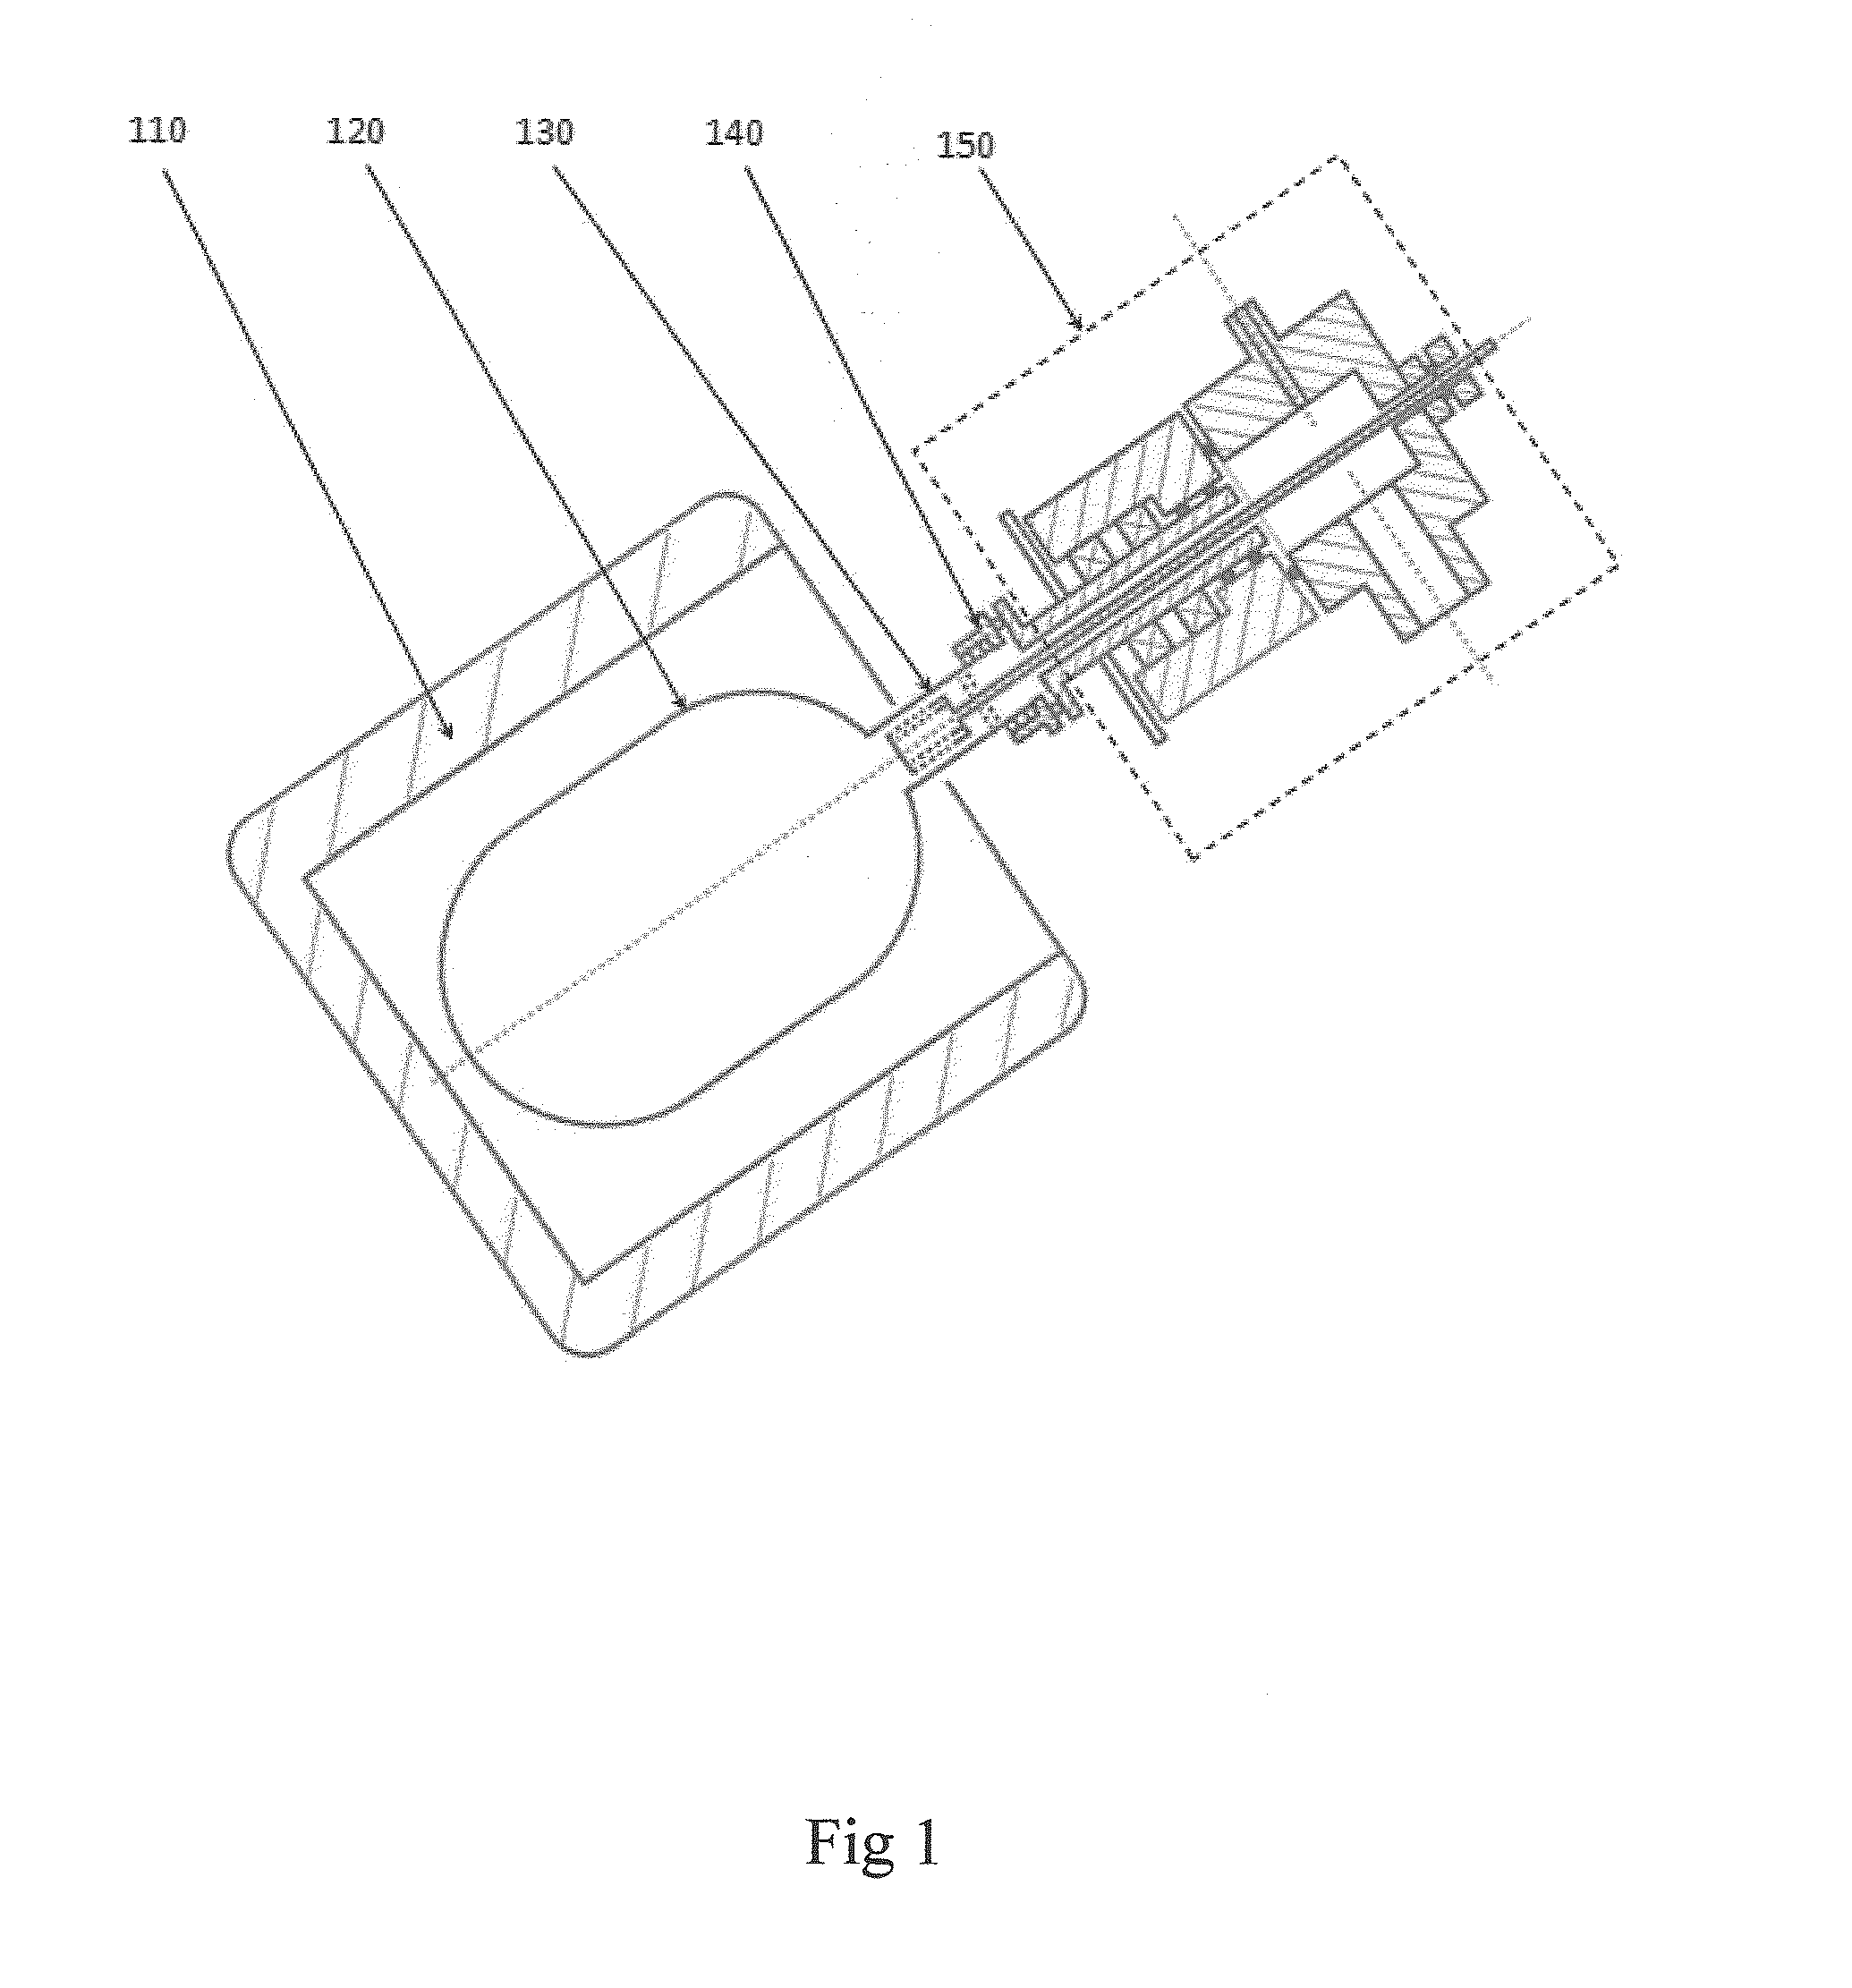 Apparatus and Method for making atomic layer deposition on fine powders